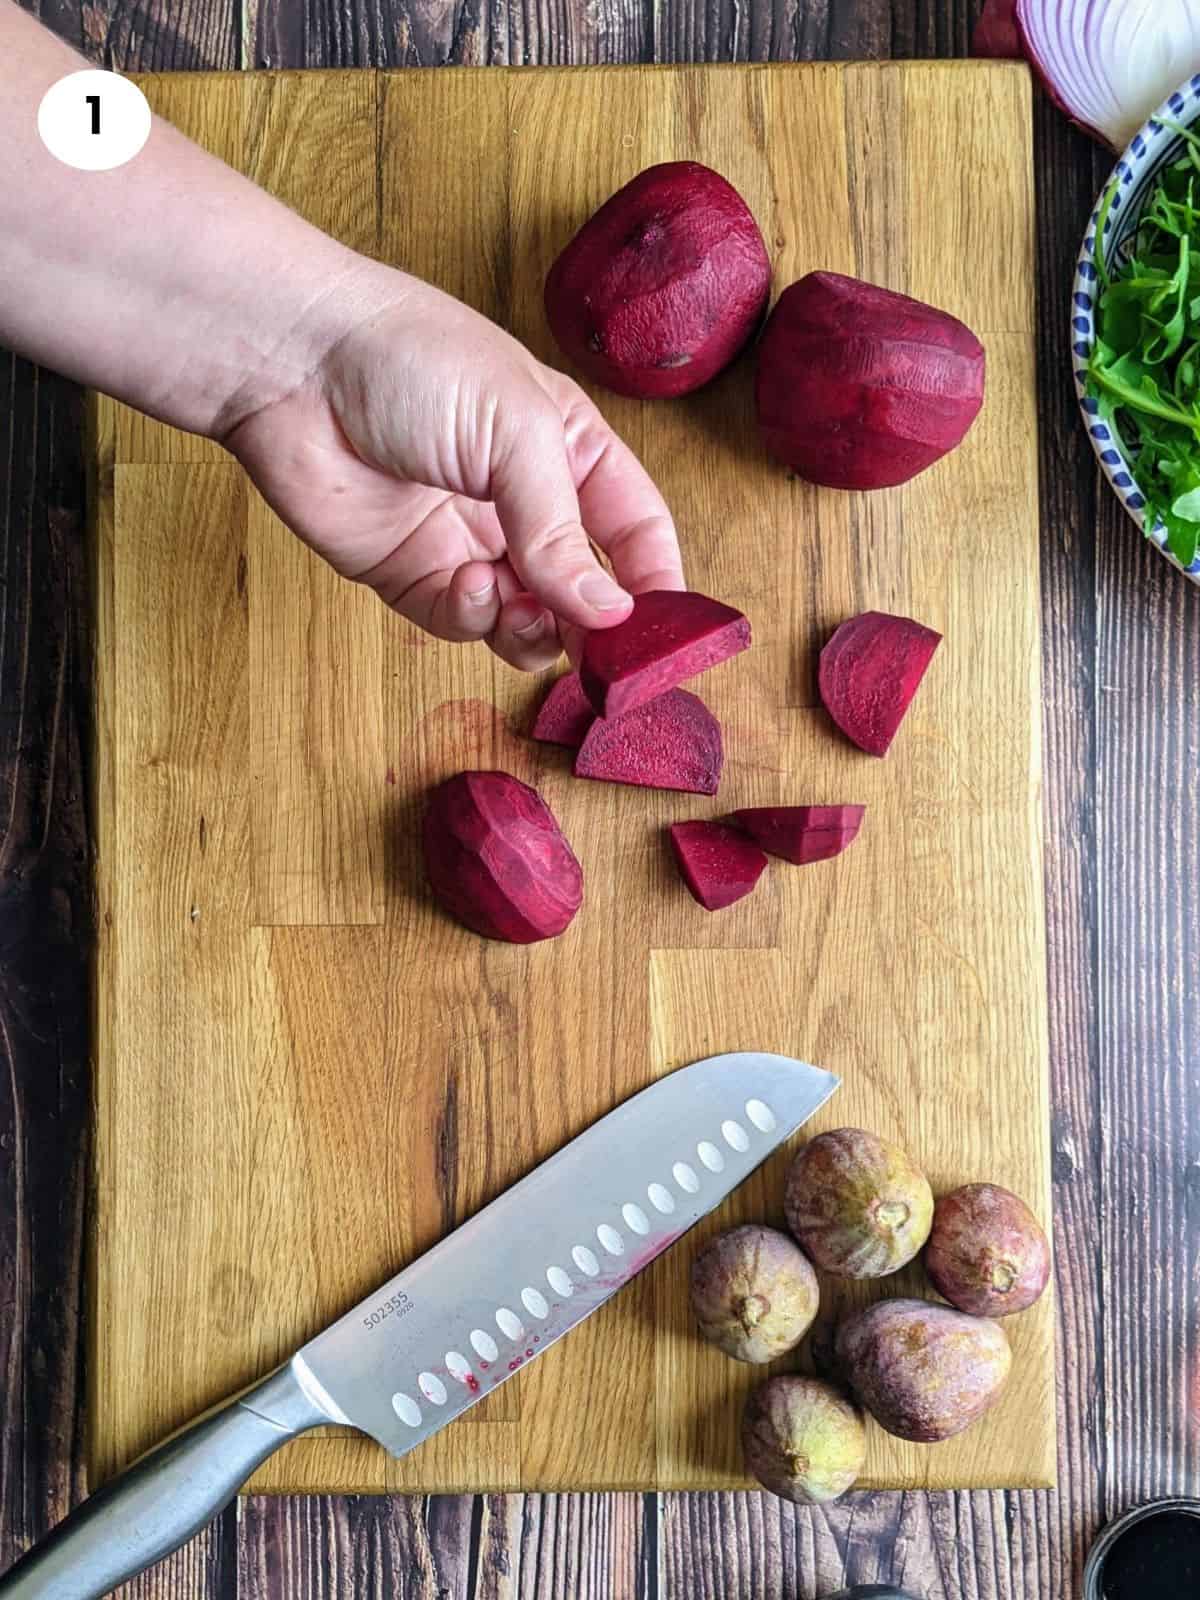 Cutting the beets into half slices.